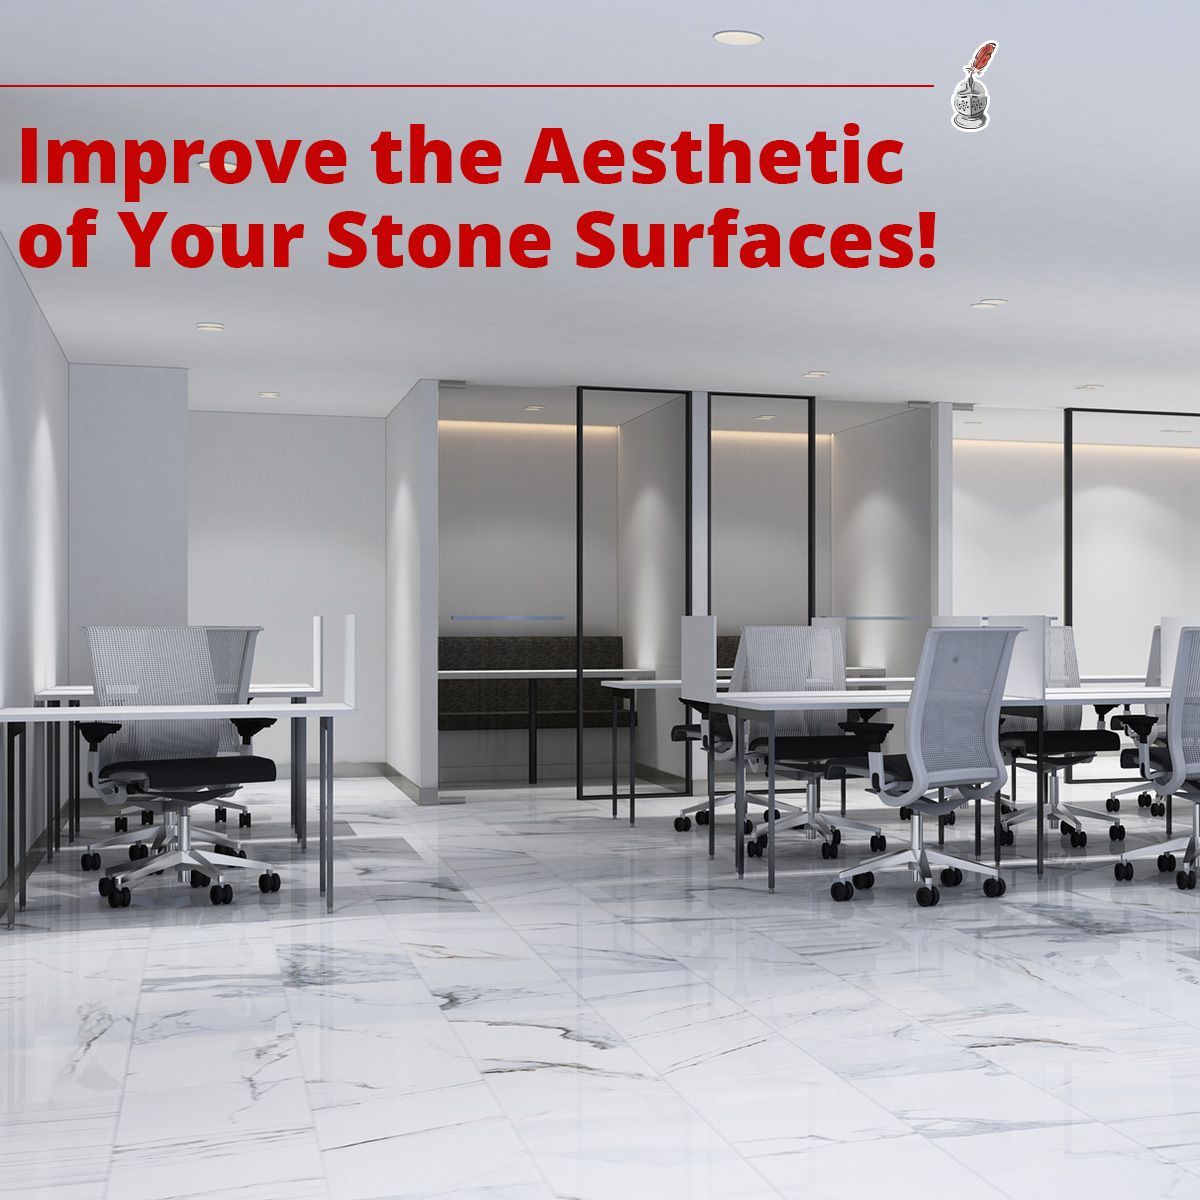 Improve the Aesthetic of Your Stone Surfaces!